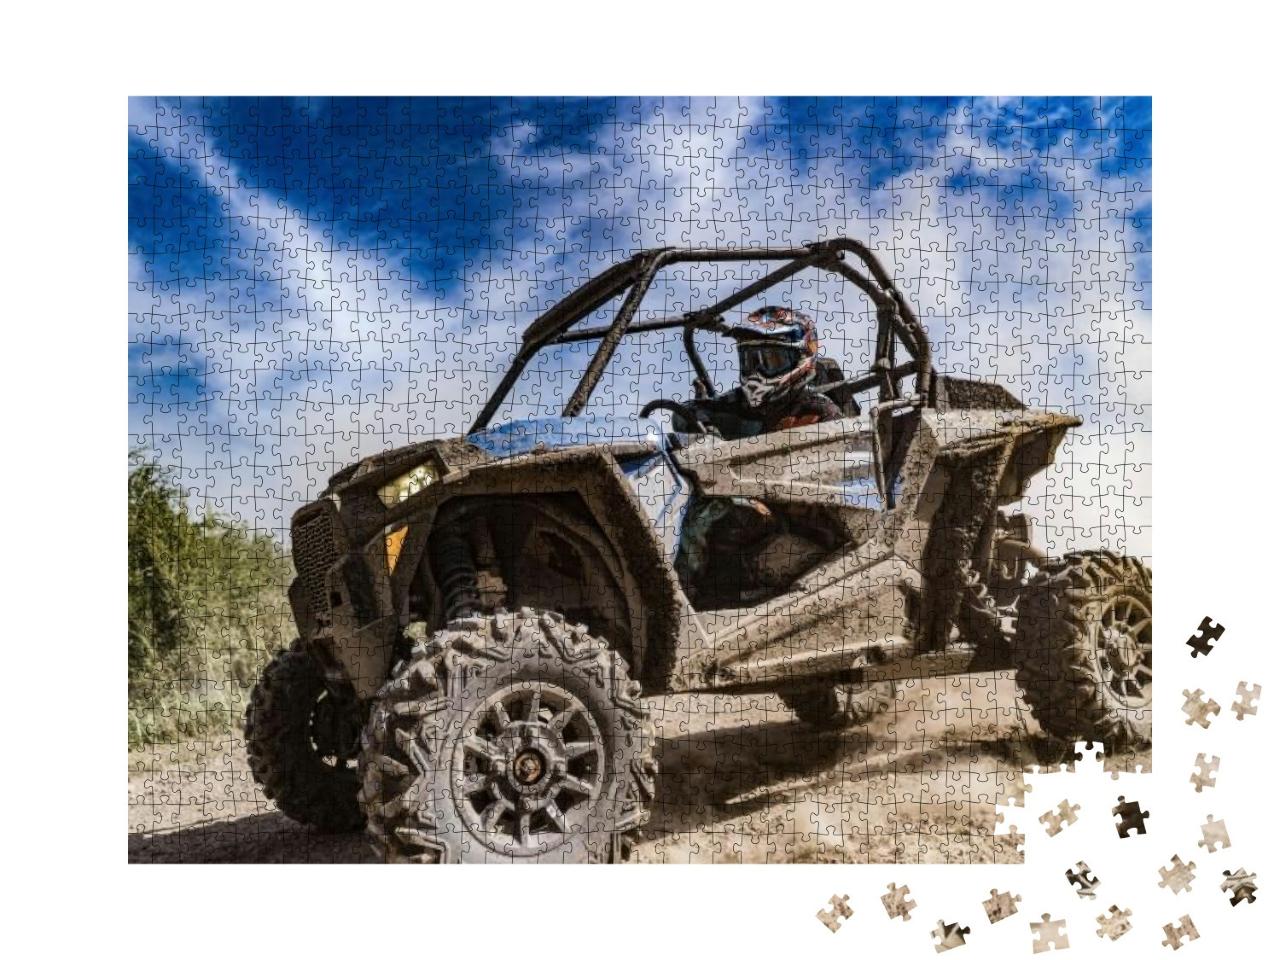 Atv Adventure. Buggy Extreme Ride on Dirt Track. Utv... Jigsaw Puzzle with 1000 pieces